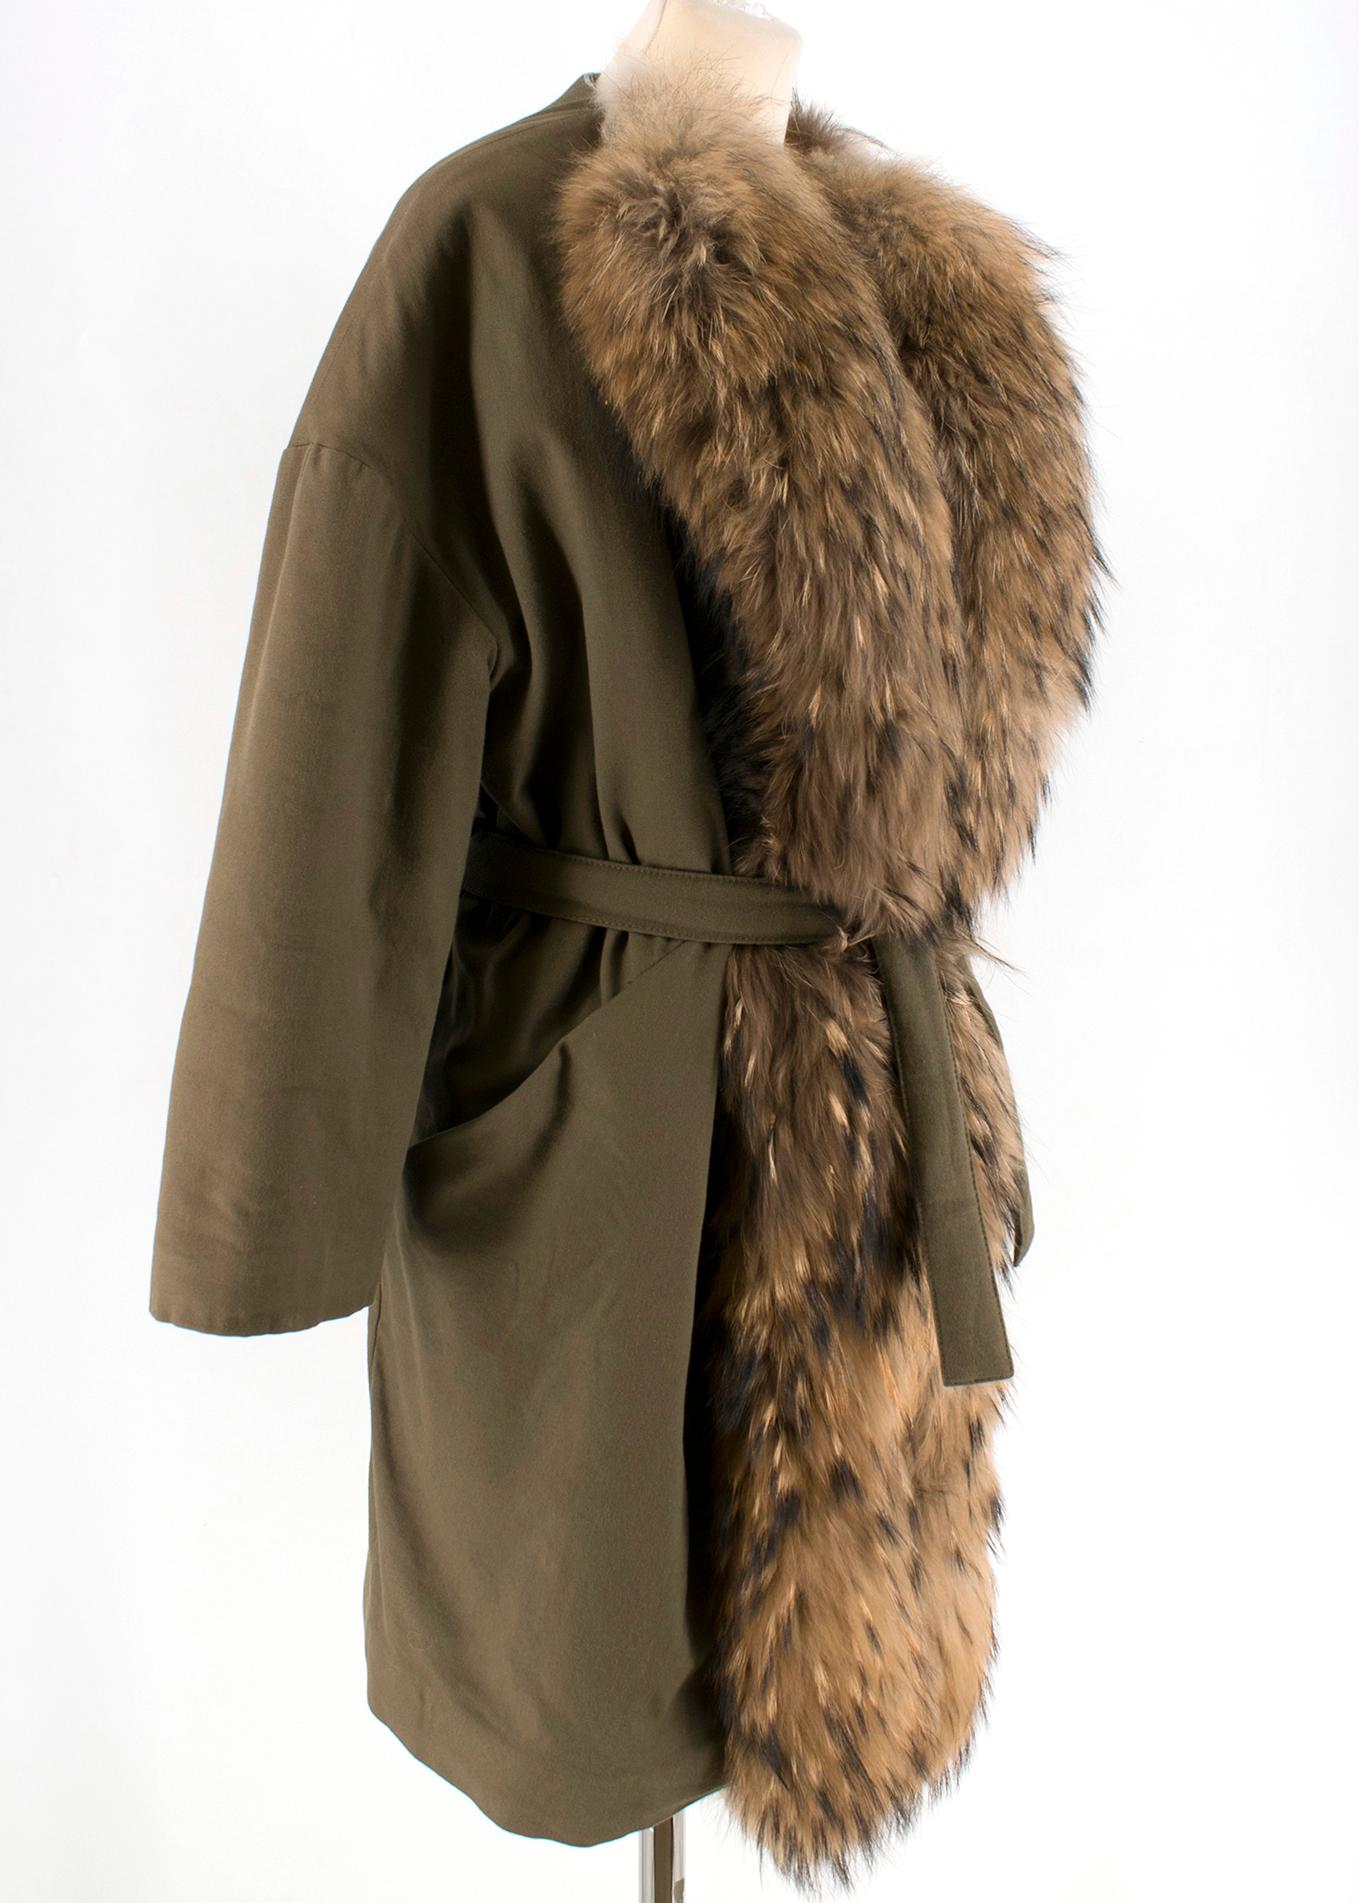 Ava Adore Khaki Belted Fur Coat 

Khaki Fur Collared Coat
Tie up belt fastening 
Hook and eye hidden centre fastening 
Raccoon fur trim 
Grey interior lining 
Long sleeved
Two exterior pockets

Please note, these items are pre-owned and may show